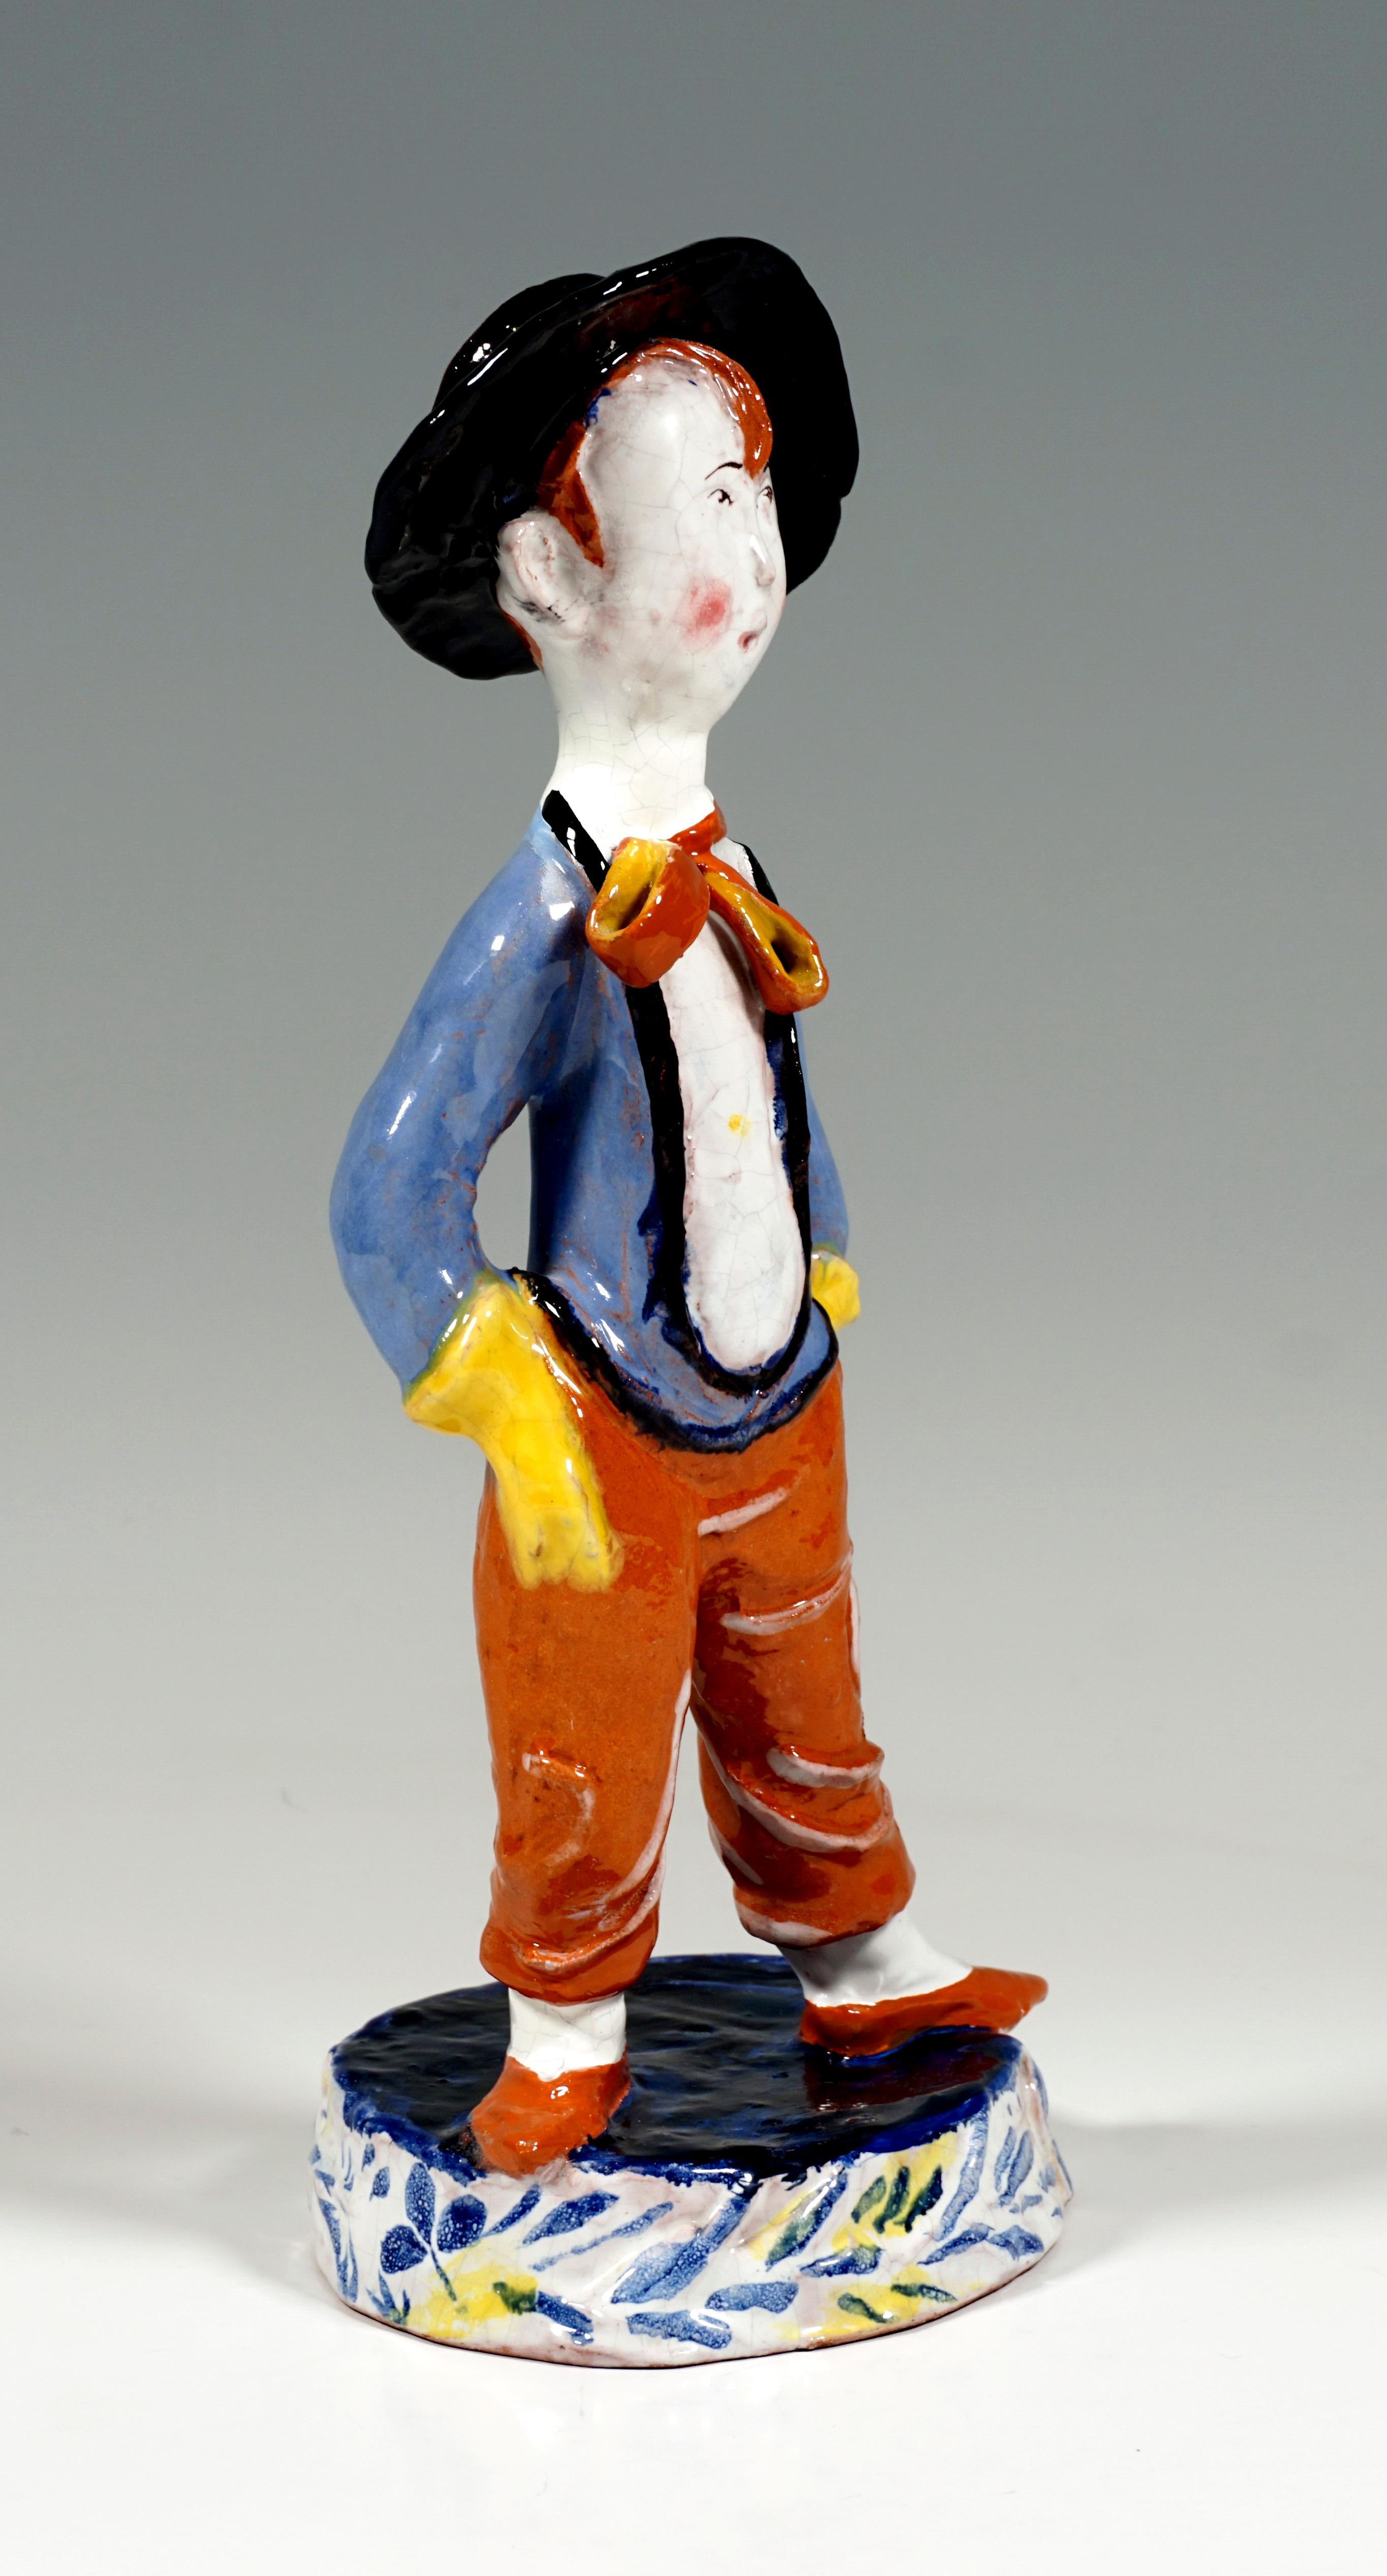 Boy with a wide-brimmed hat standing upright and legs apart, both hands hidden in his trouser pockets, low-cut jacket, long, wrinkled trousers, tied bow around his neck, his mouth open for whistling.
On a eled, relief side with blue, floral